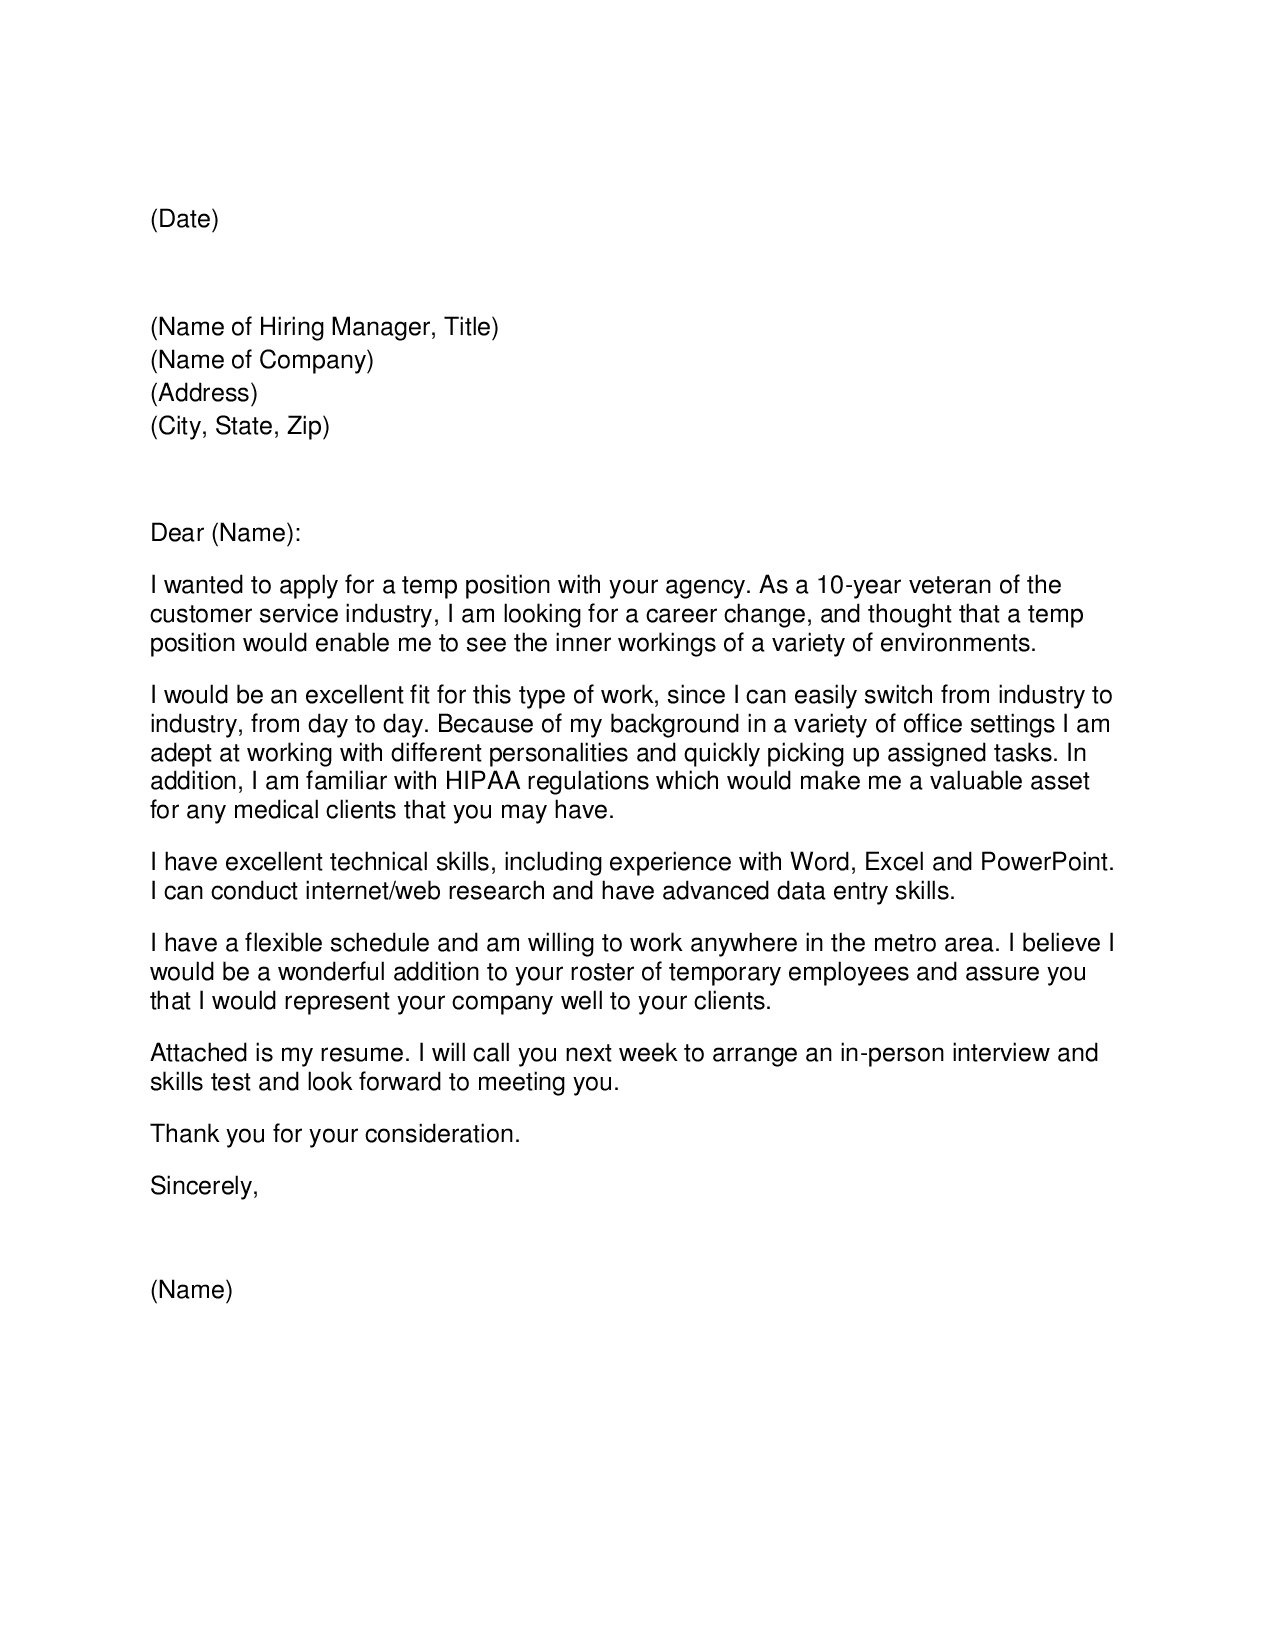 Cover letter for applying to phd position